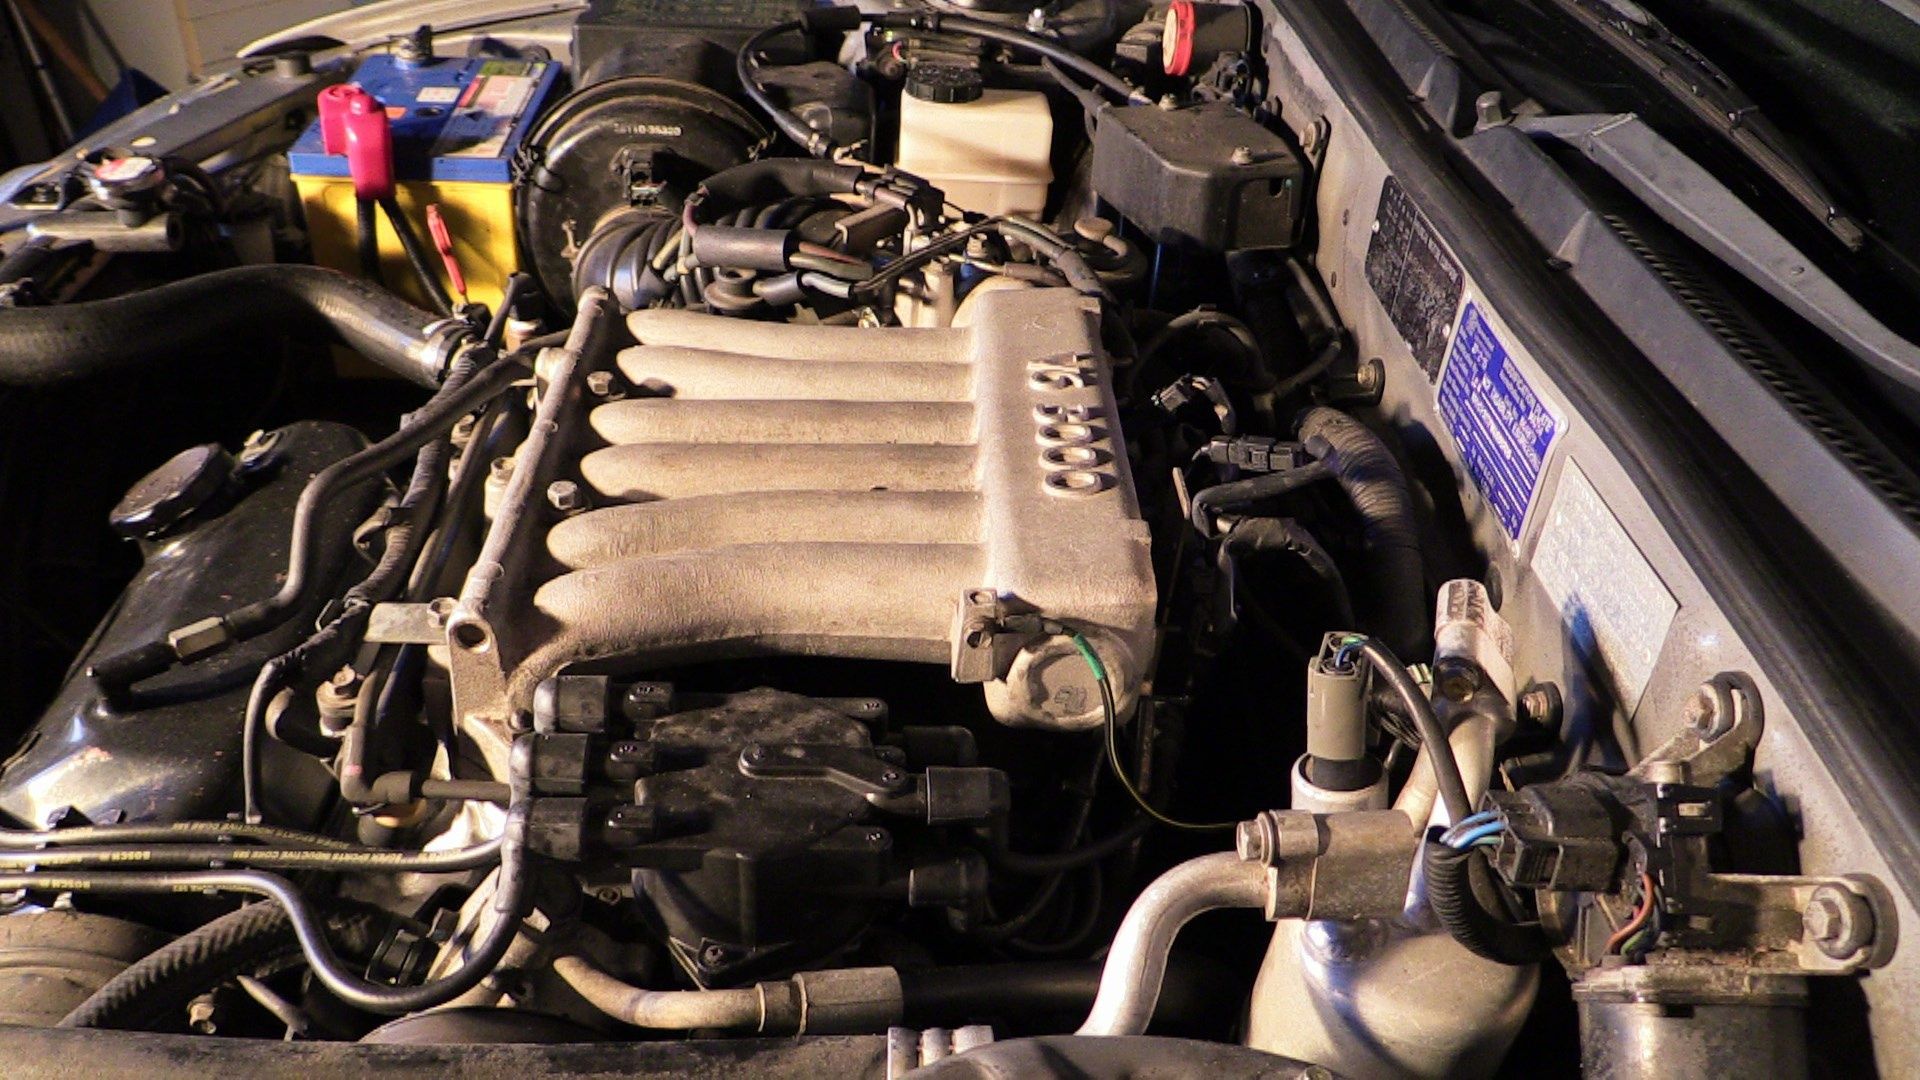 V6 Engine- Repair Is More Difficult Because It's Mechanically Complex